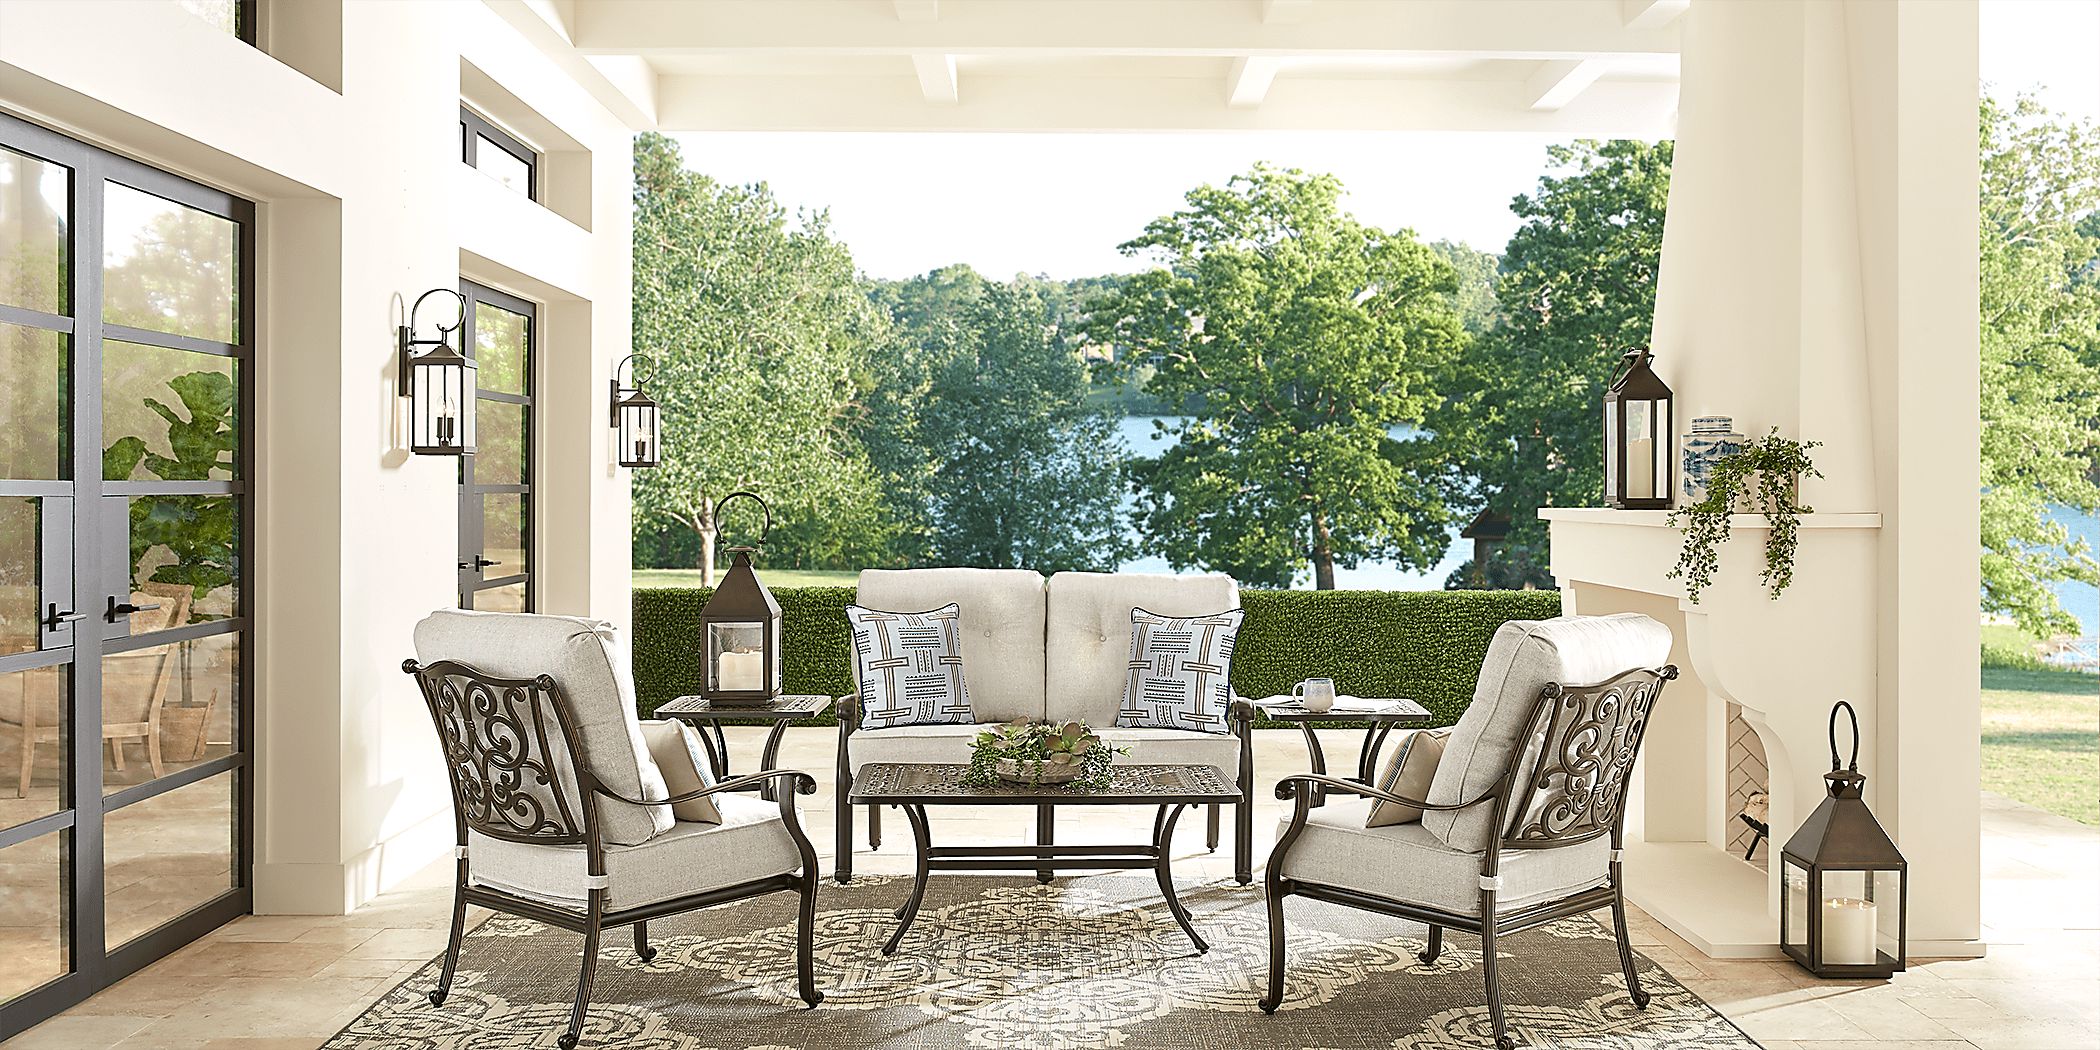 Cindy Crawford Home Lake Como Antique Bronze 4 Pc Outdoor Seating Set with Ash Cushions